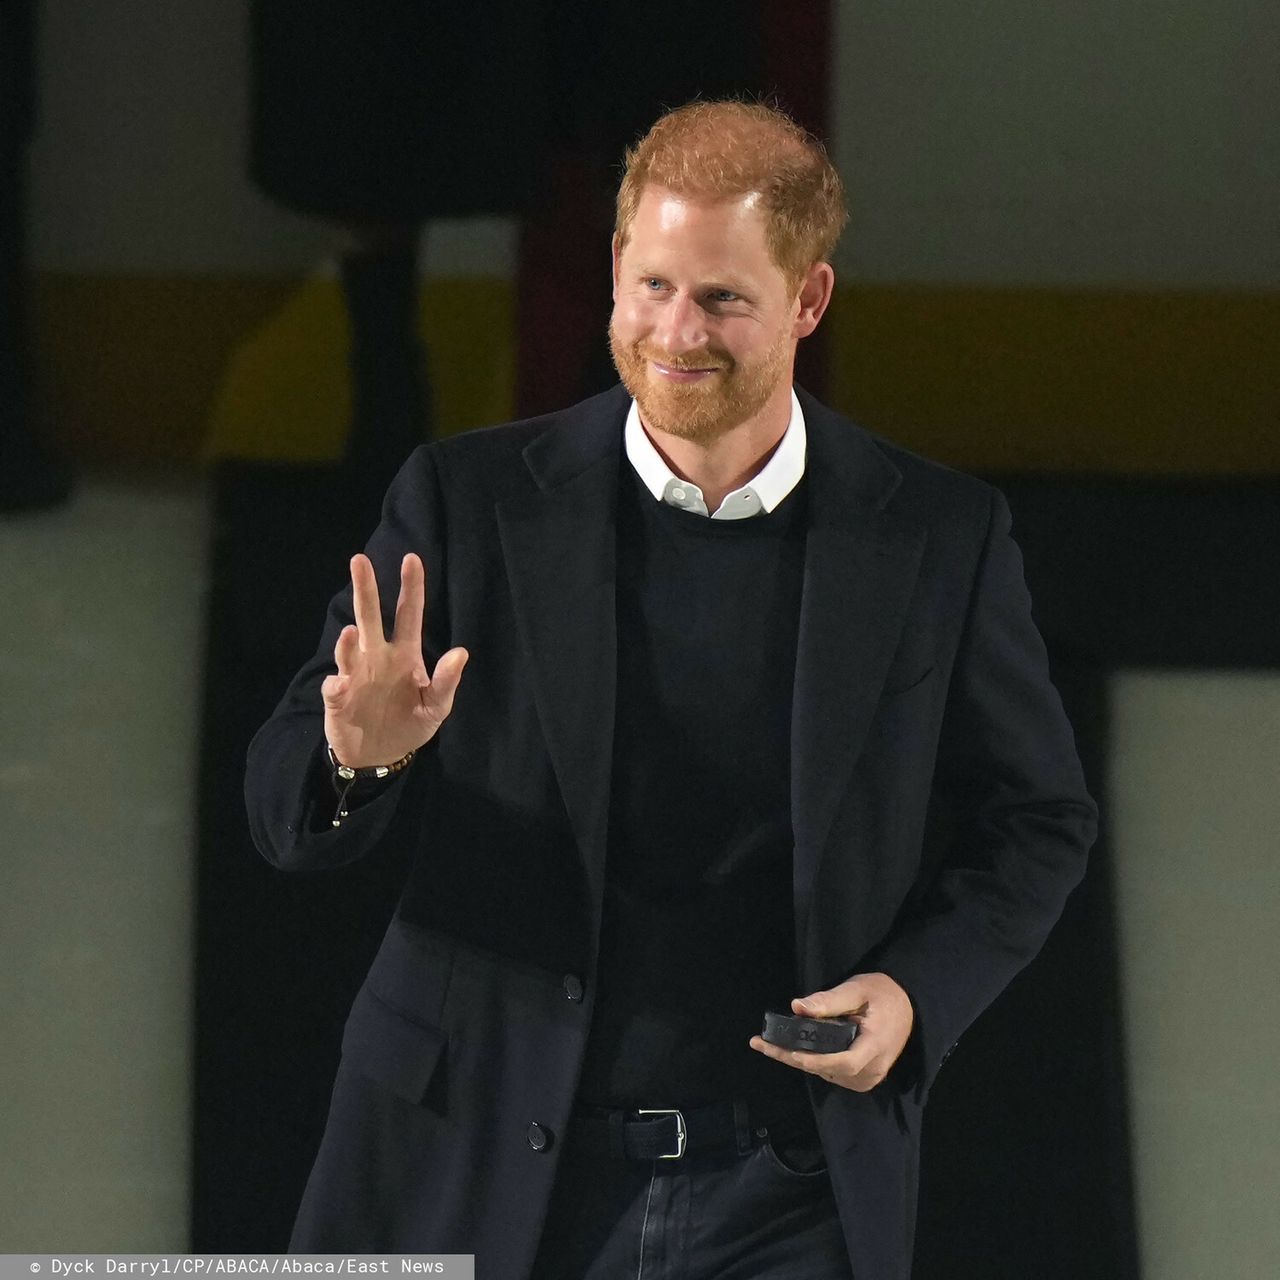 Prince Harry, Duke of Sussex, waves to the crowd, as he arrives to drop the puck for a ceremonial faceoff before the Vancouver Canucks and San Jose Sharks play an NHL hockey game in Vancouver, BC, Canada on Monday, November 20, 2023. The Invictus Games, founded by the Duke of Sussex, are scheduled to be held in Vancouver and Whistler in 2025. Photo by Darryl Dyck/CP/ABACAPRESS.COM